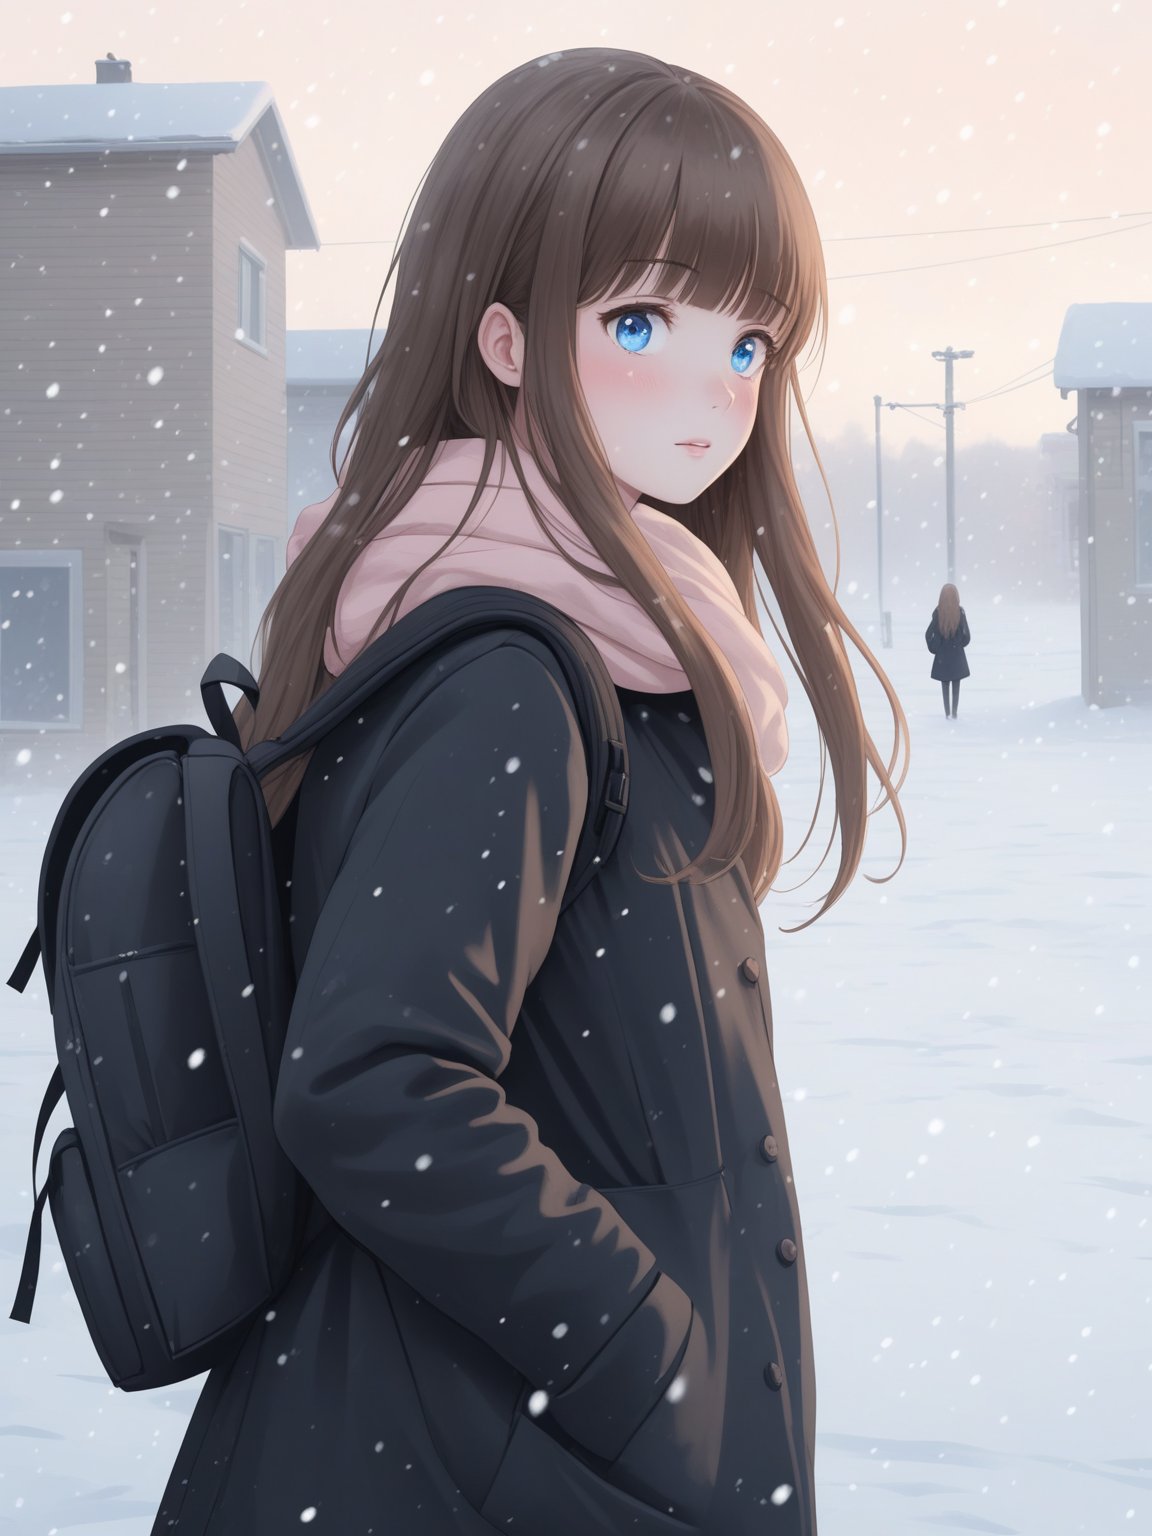 Girl, long straight brown hair with bangs, blue eyes, looks at the viewer, blush, dressed in a black coat, wears a black backpack on her back, flowing hair, wind, stands outside in the snow, snow, winter, snow is falling, blizzard, hands in pockets, it's light outside, no sun, cloudy, pastel colors, in detail